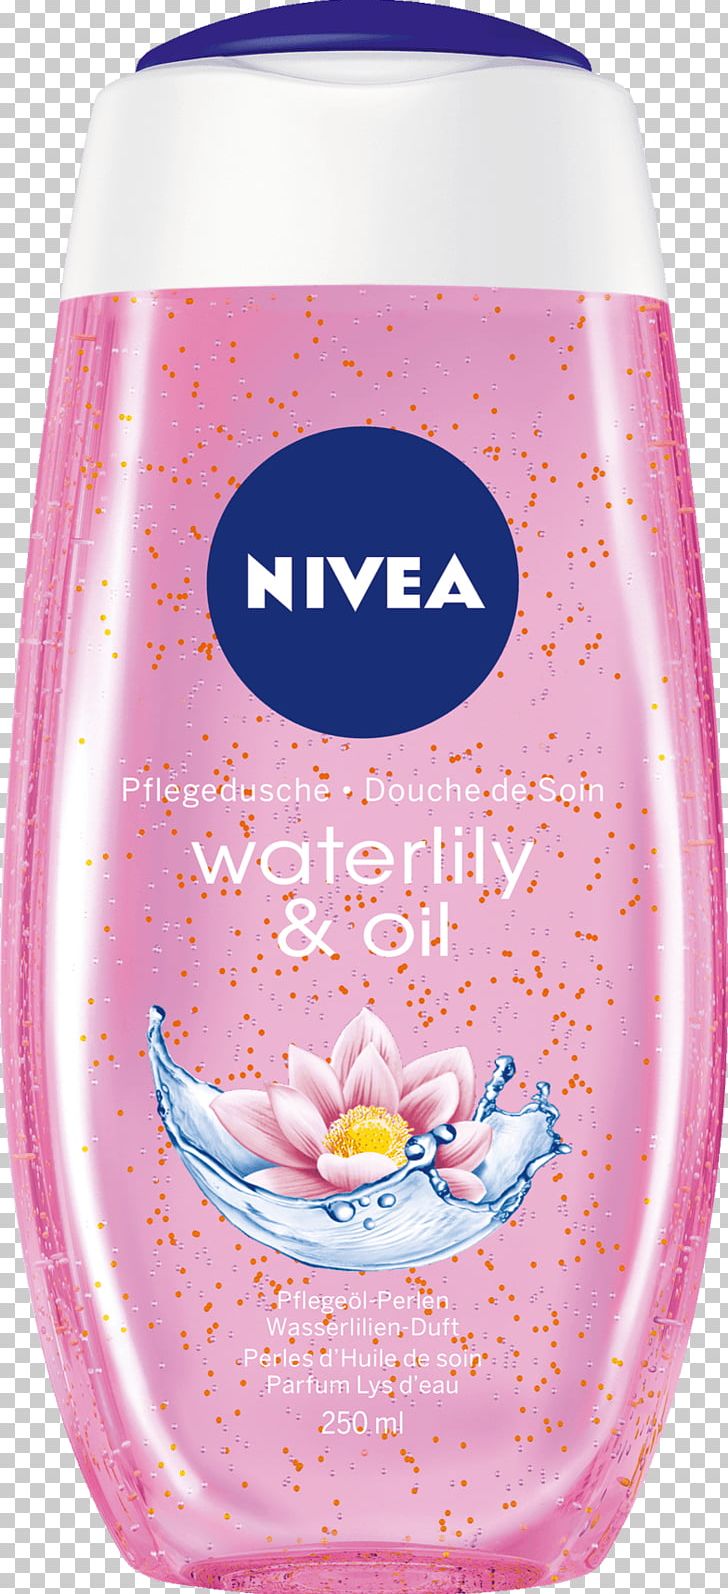 Lotion NIVEA Care Intensive Pflege Shower Gel Cream PNG, Clipart, Cosmetics, Cream, Face, Gel, Lily Free PNG Download